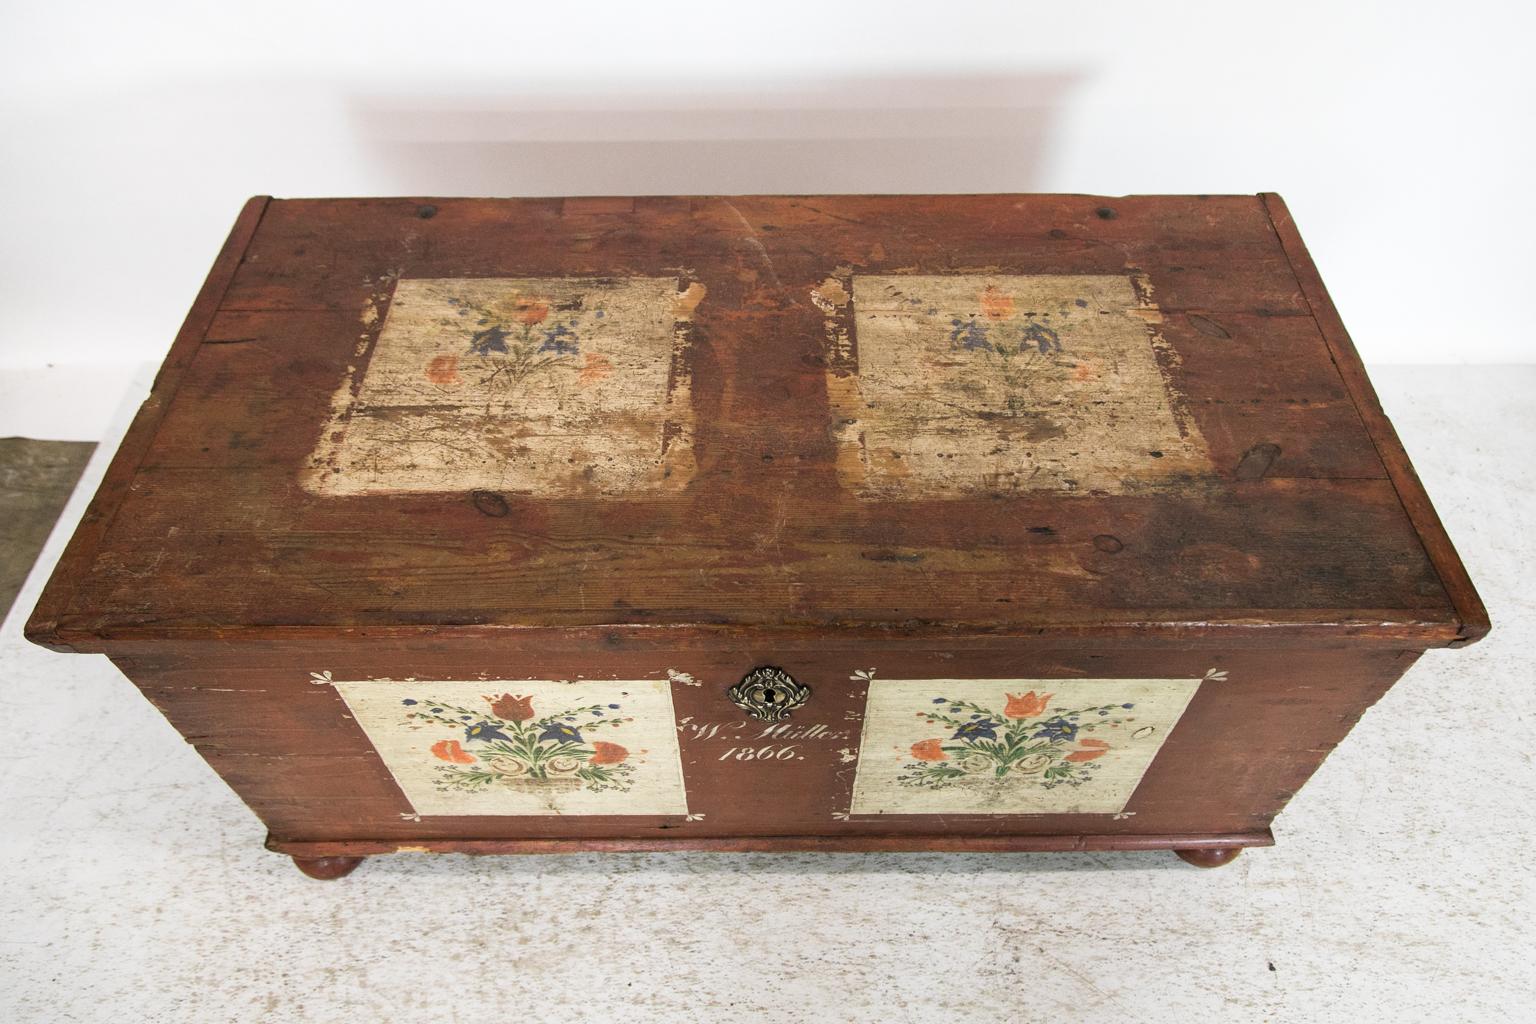 The top and bottom of this blanket chest have the original red paint and floral panels on the front. It is signed on the front: 